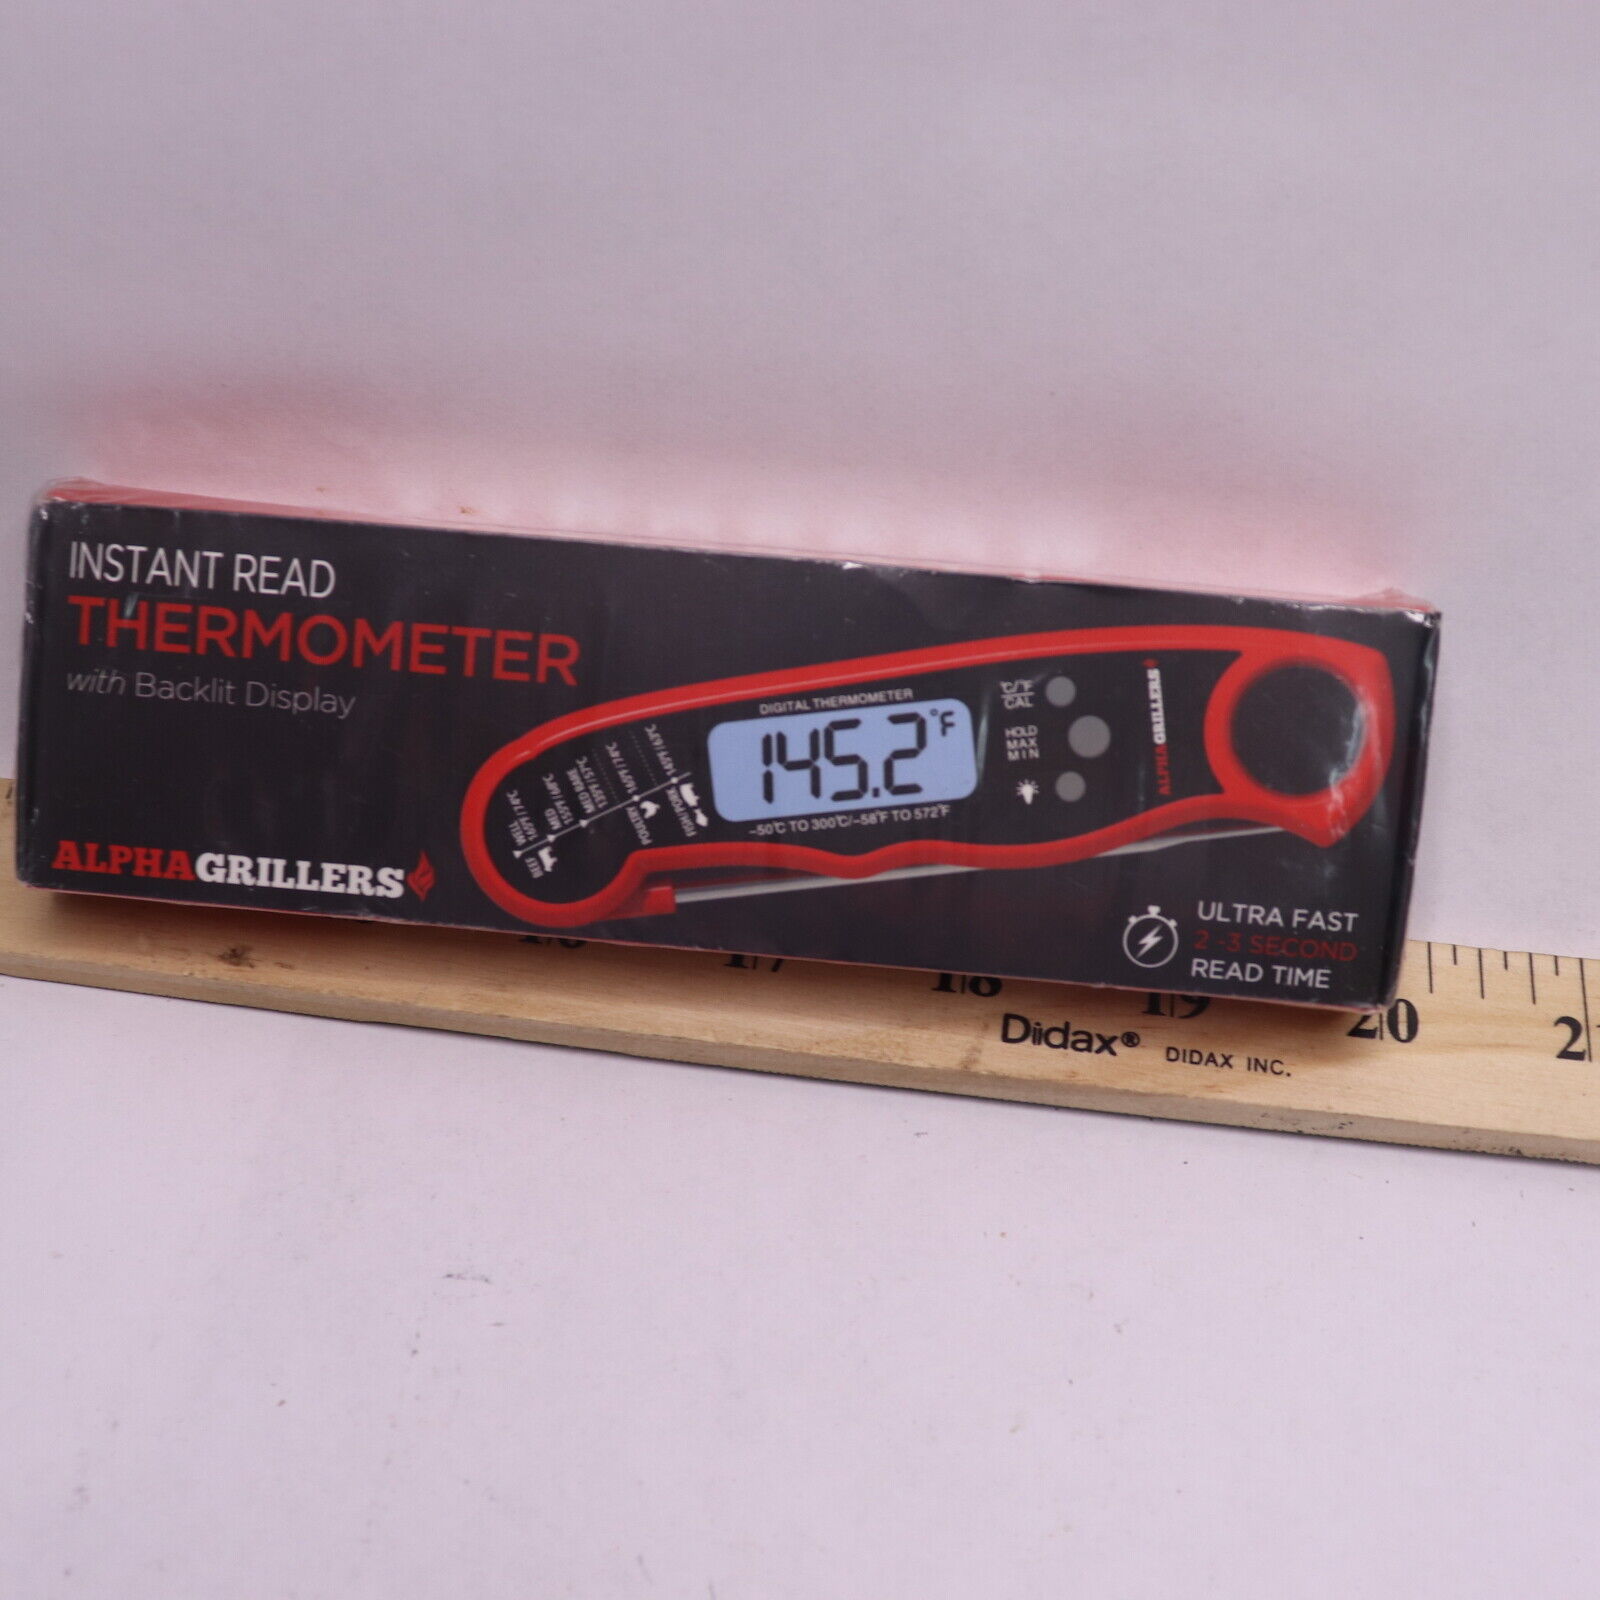 Alpha Grillers Read Meat Thermometer For Grill And Cooking QM2180